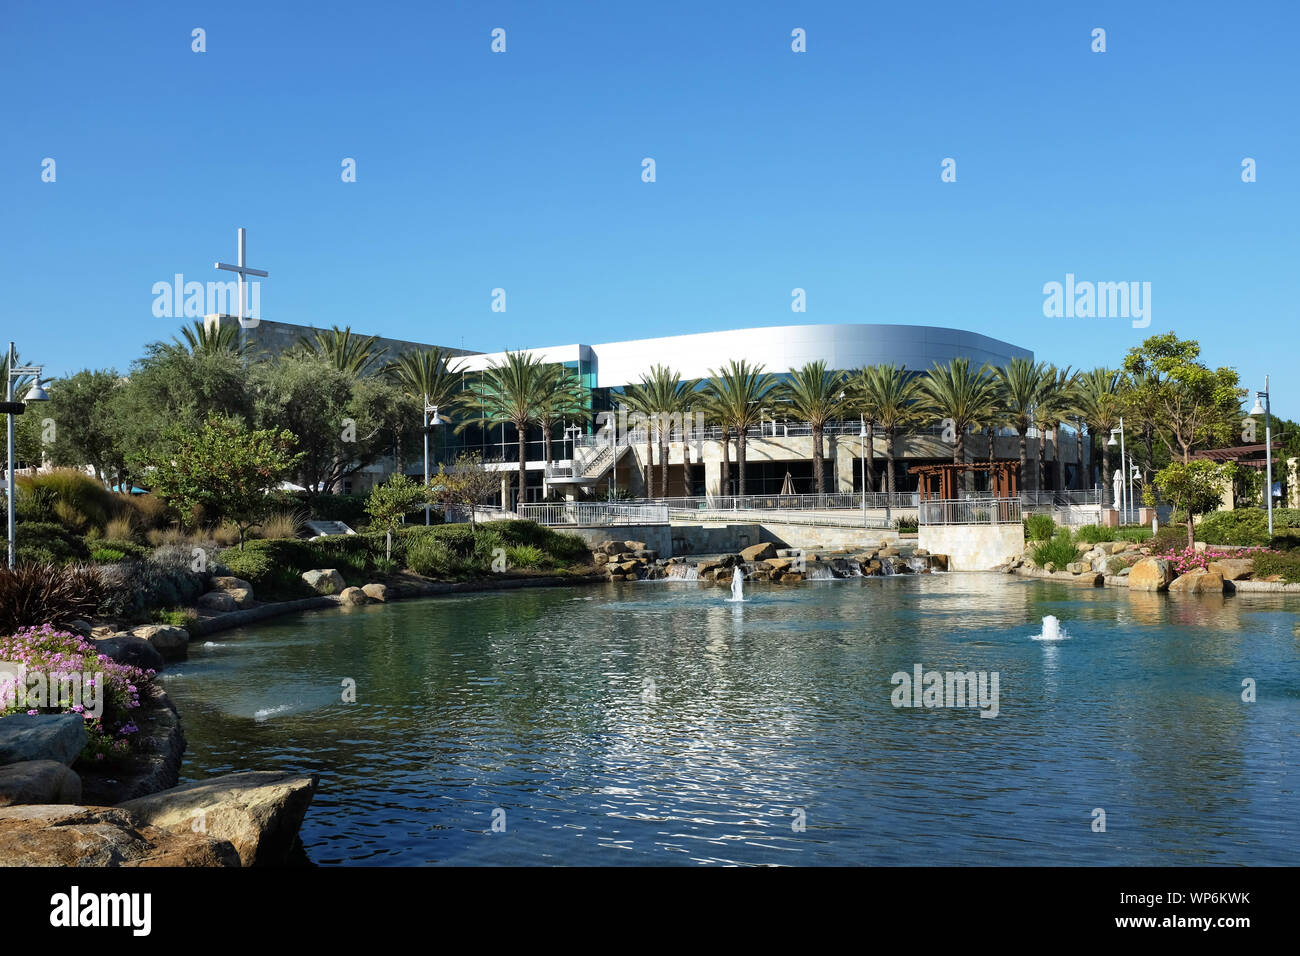 IRVINE, CALIFORNIA - SEPT 7, 2019: Mariners Church Worship Center and Lake, a non-denominational, Christian Church located in central Orange County. Stock Photo